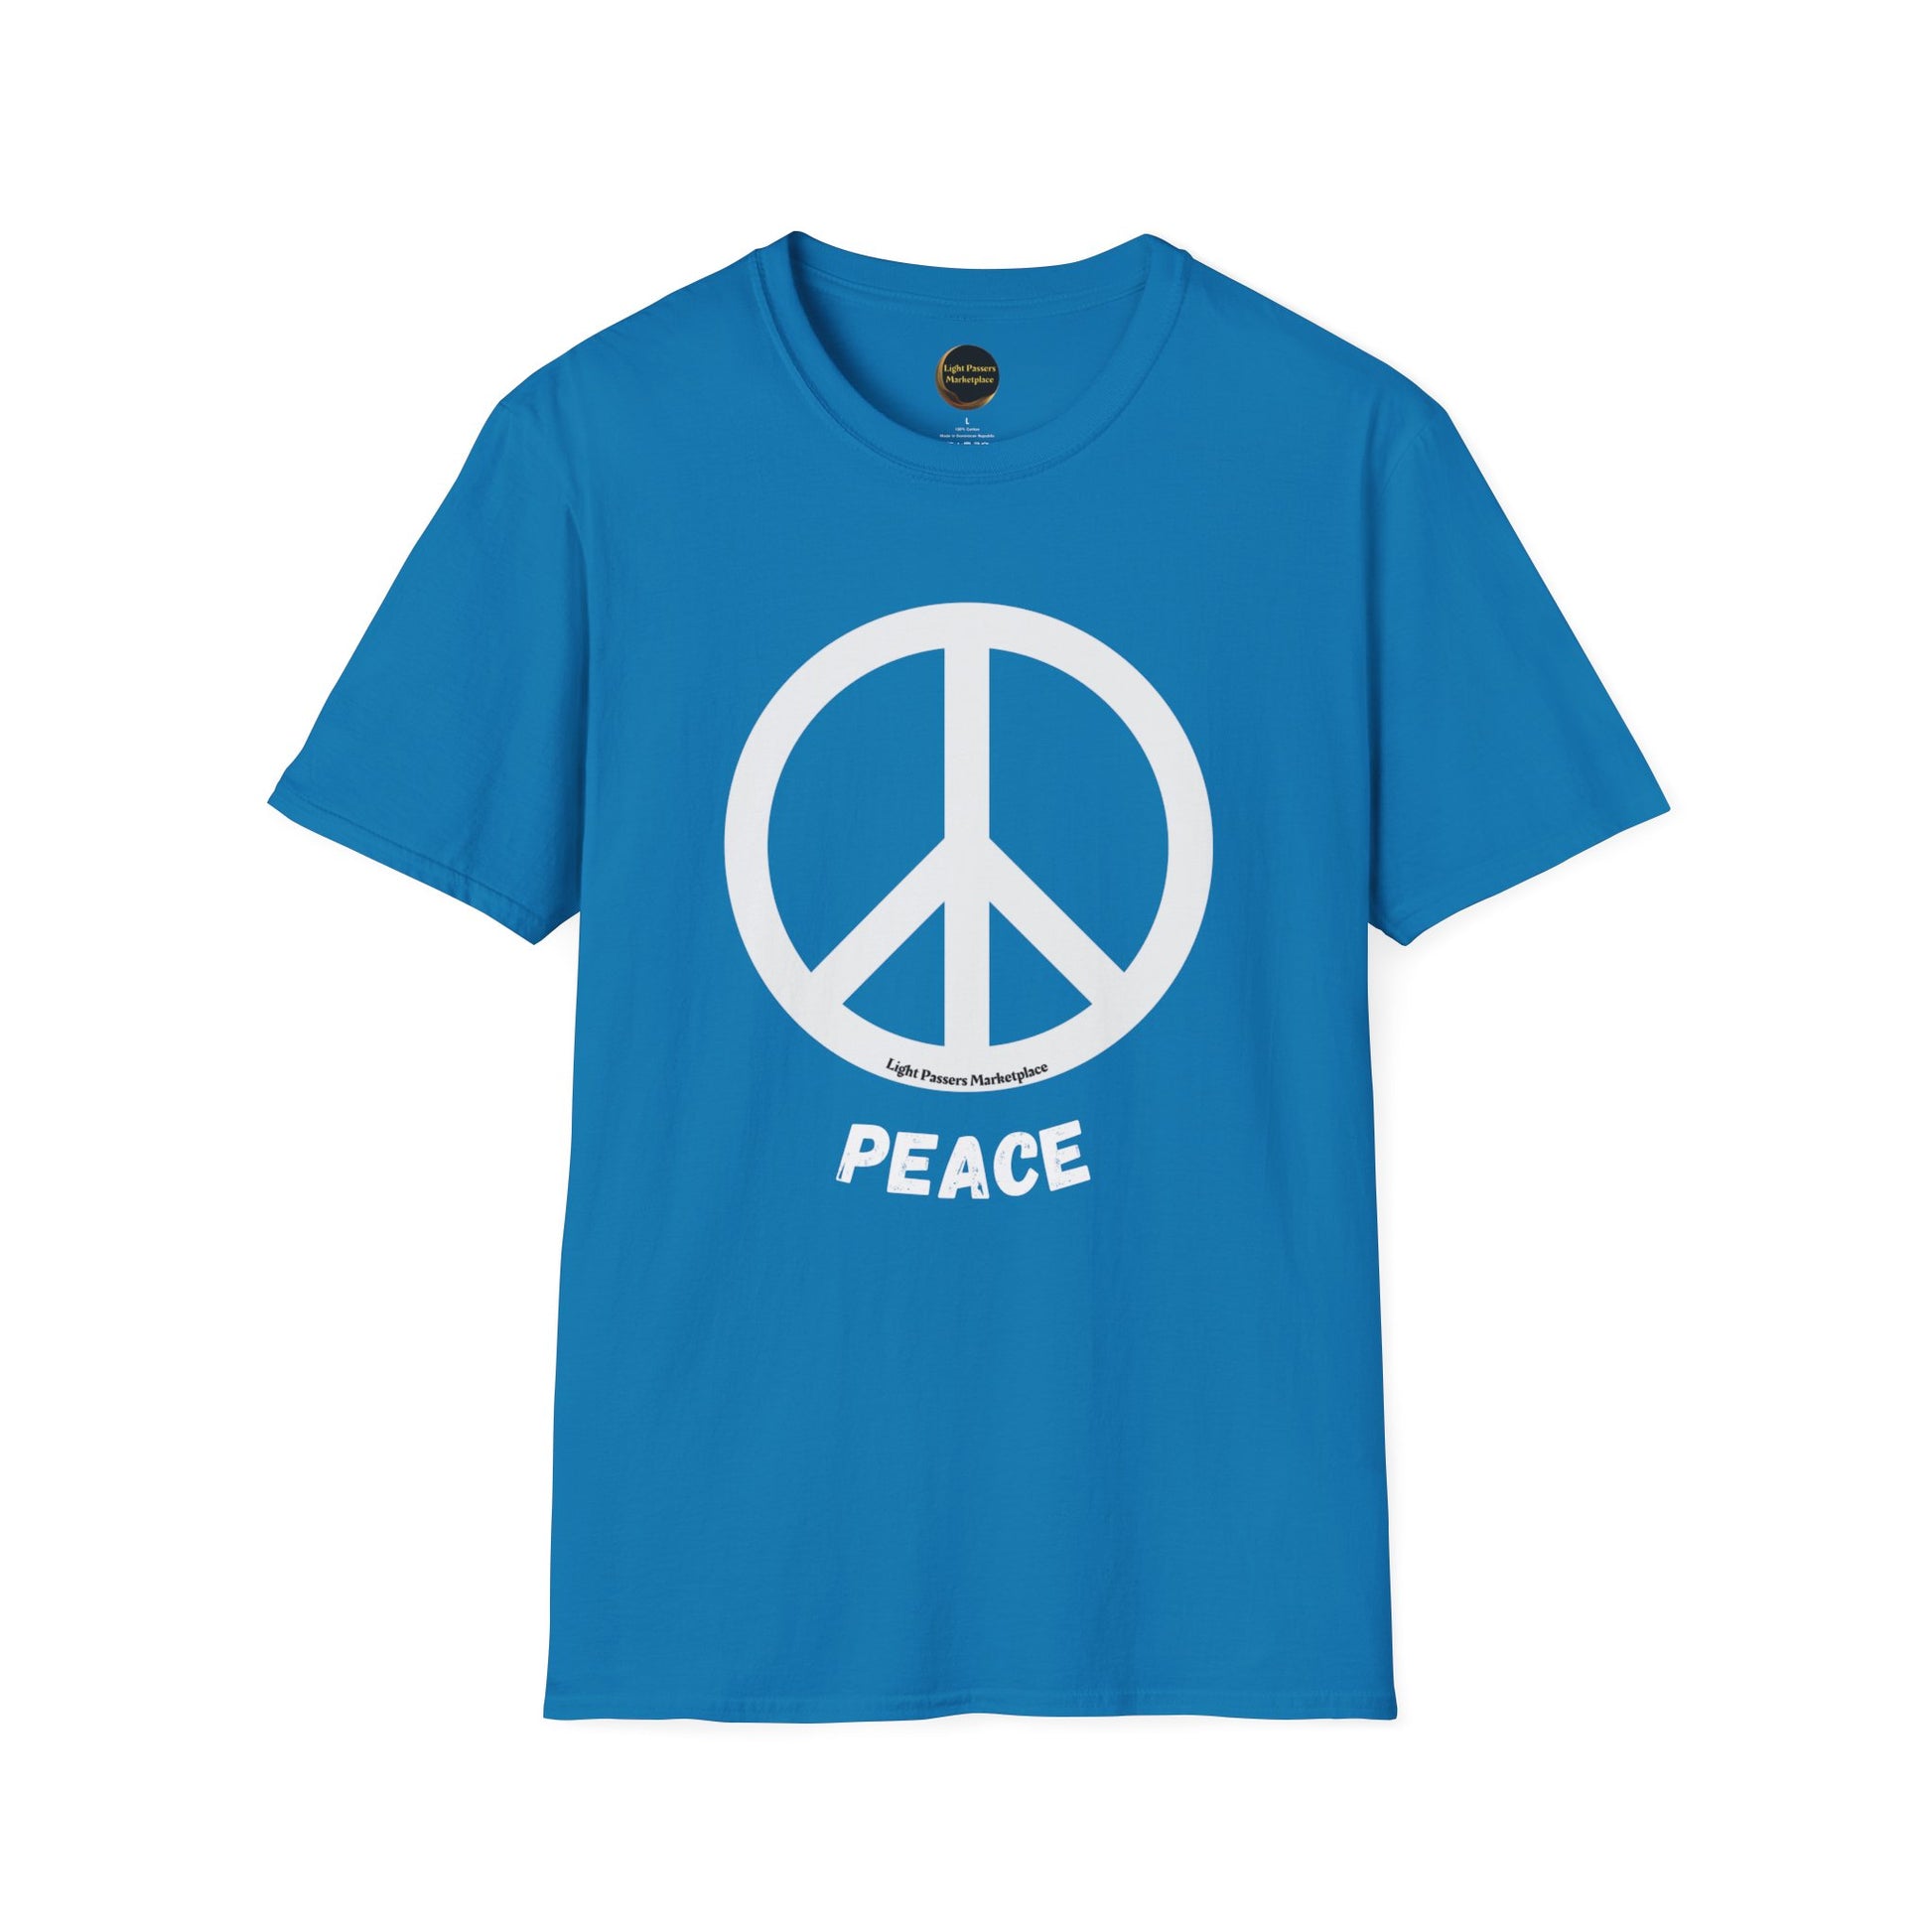 Unisex soft-style t-shirt featuring a peace sign logo on a blue shirt. Made of 100% ring-spun cotton, lightweight and durable with a clean crew neckline. Ethically sourced and Oeko-Tex certified for quality.